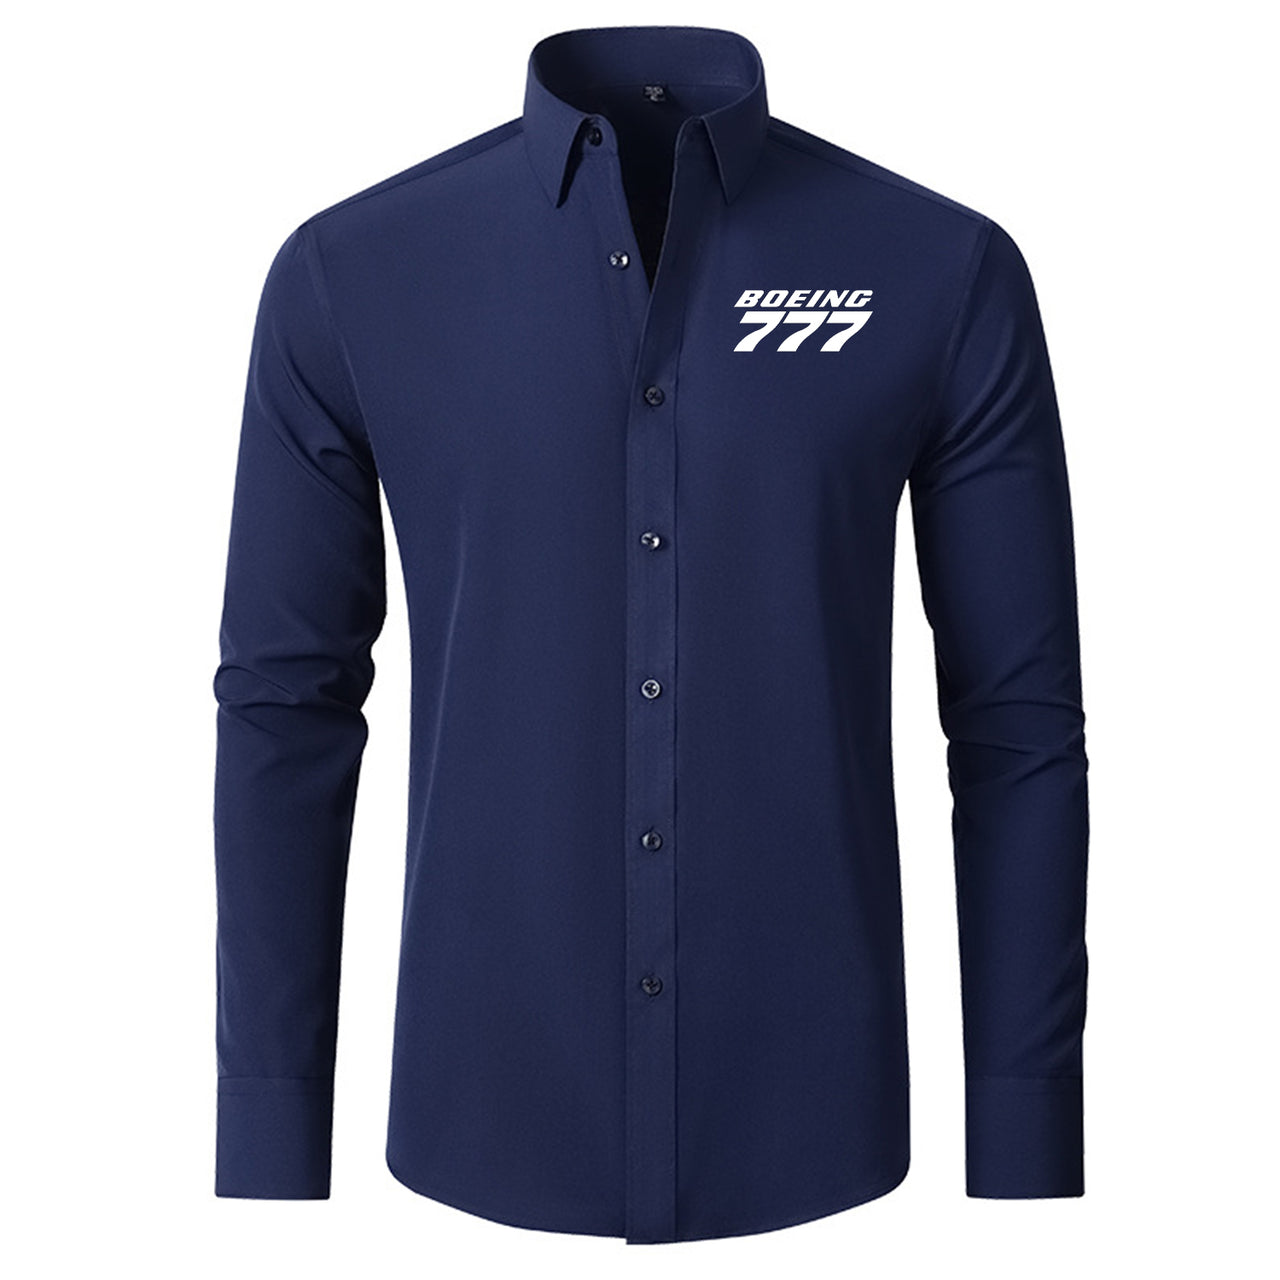 Boeing 777 & Text Designed Long Sleeve Shirts